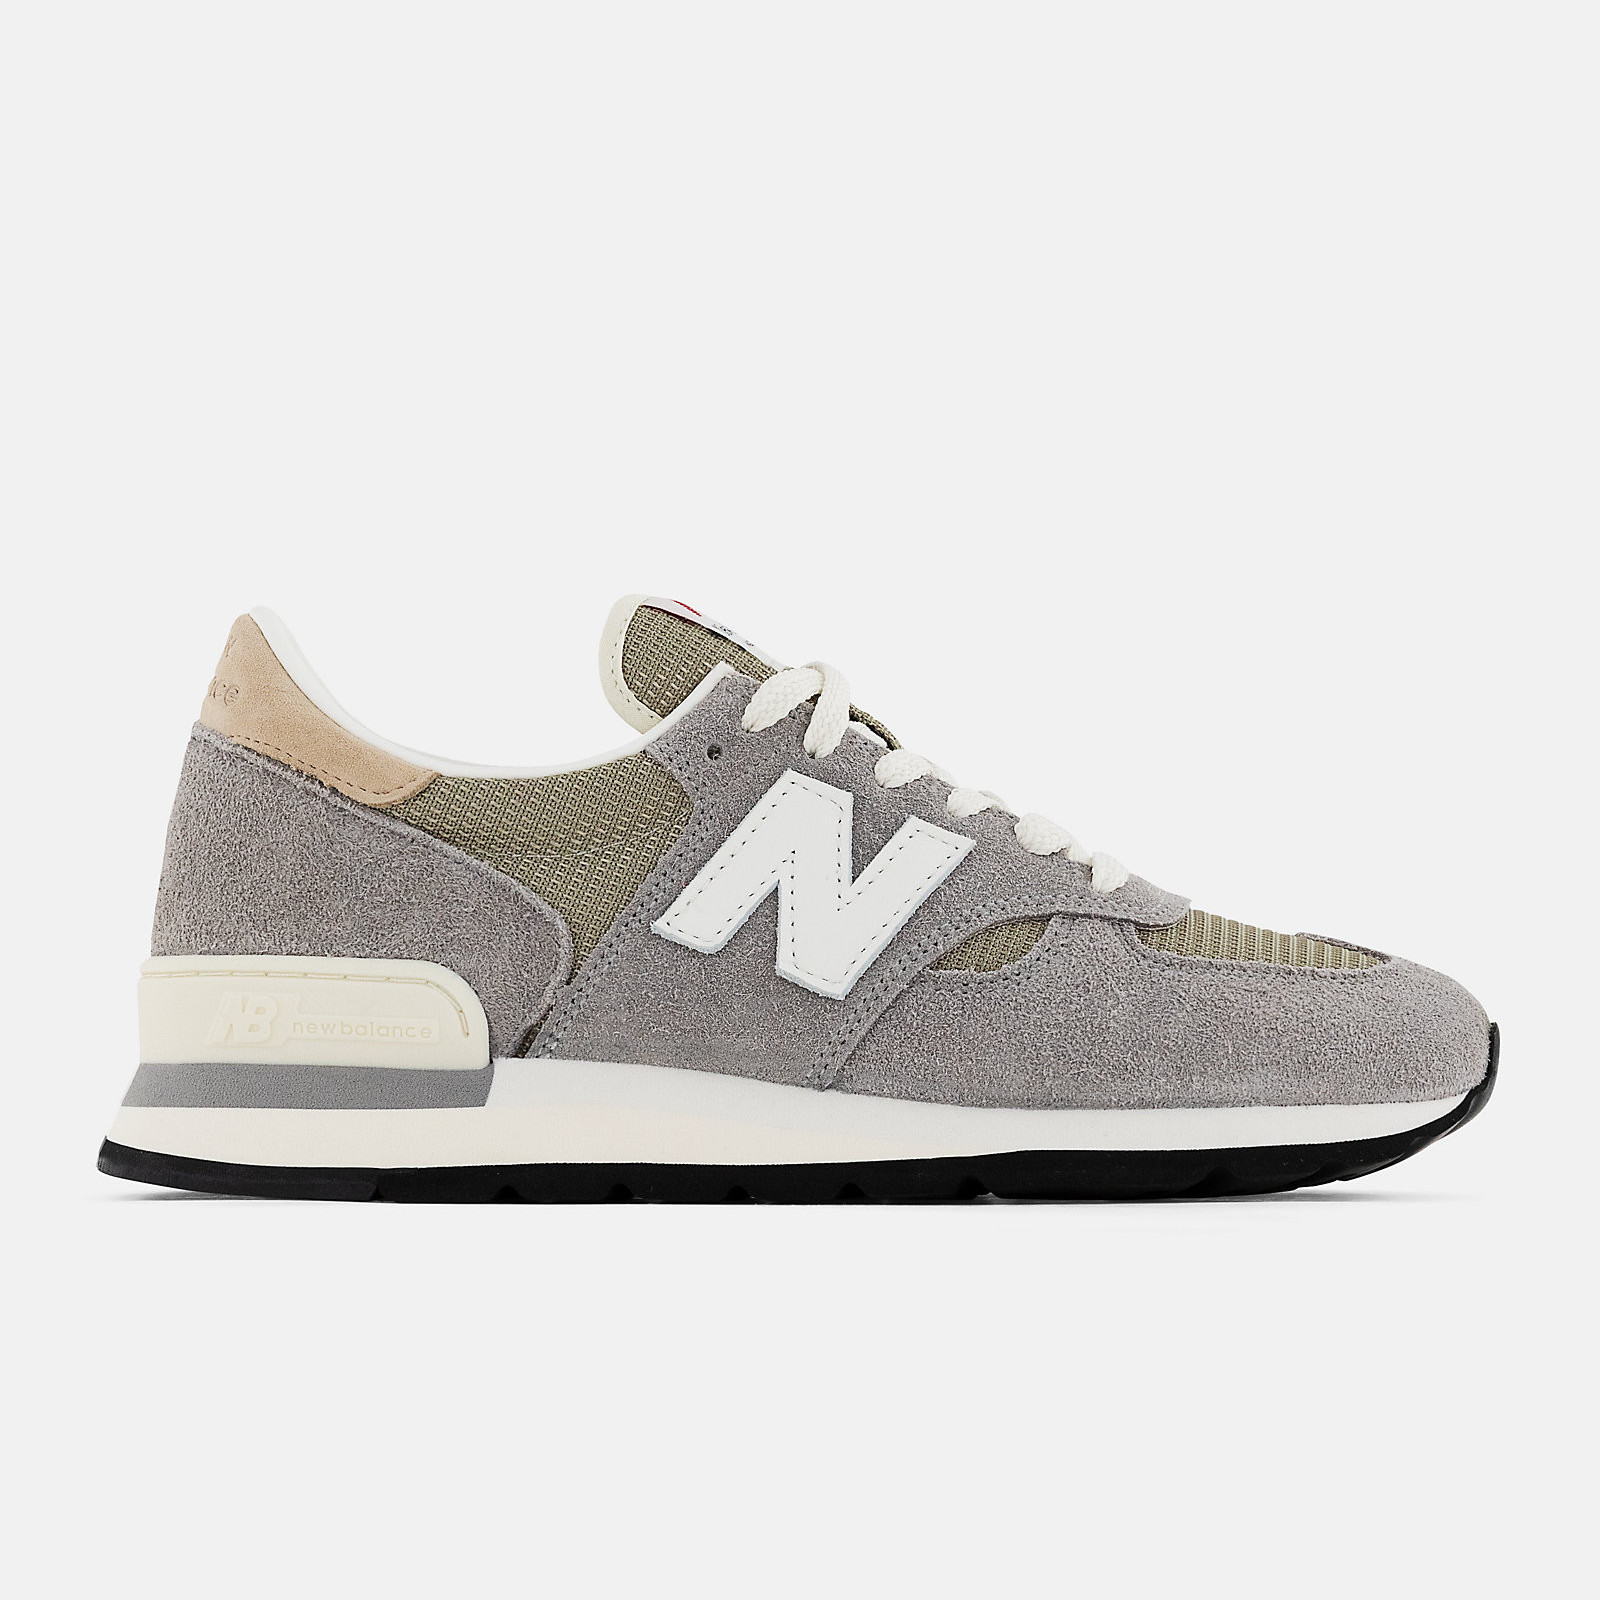 New Balance 990v1
Made In USA
« Marblehead »